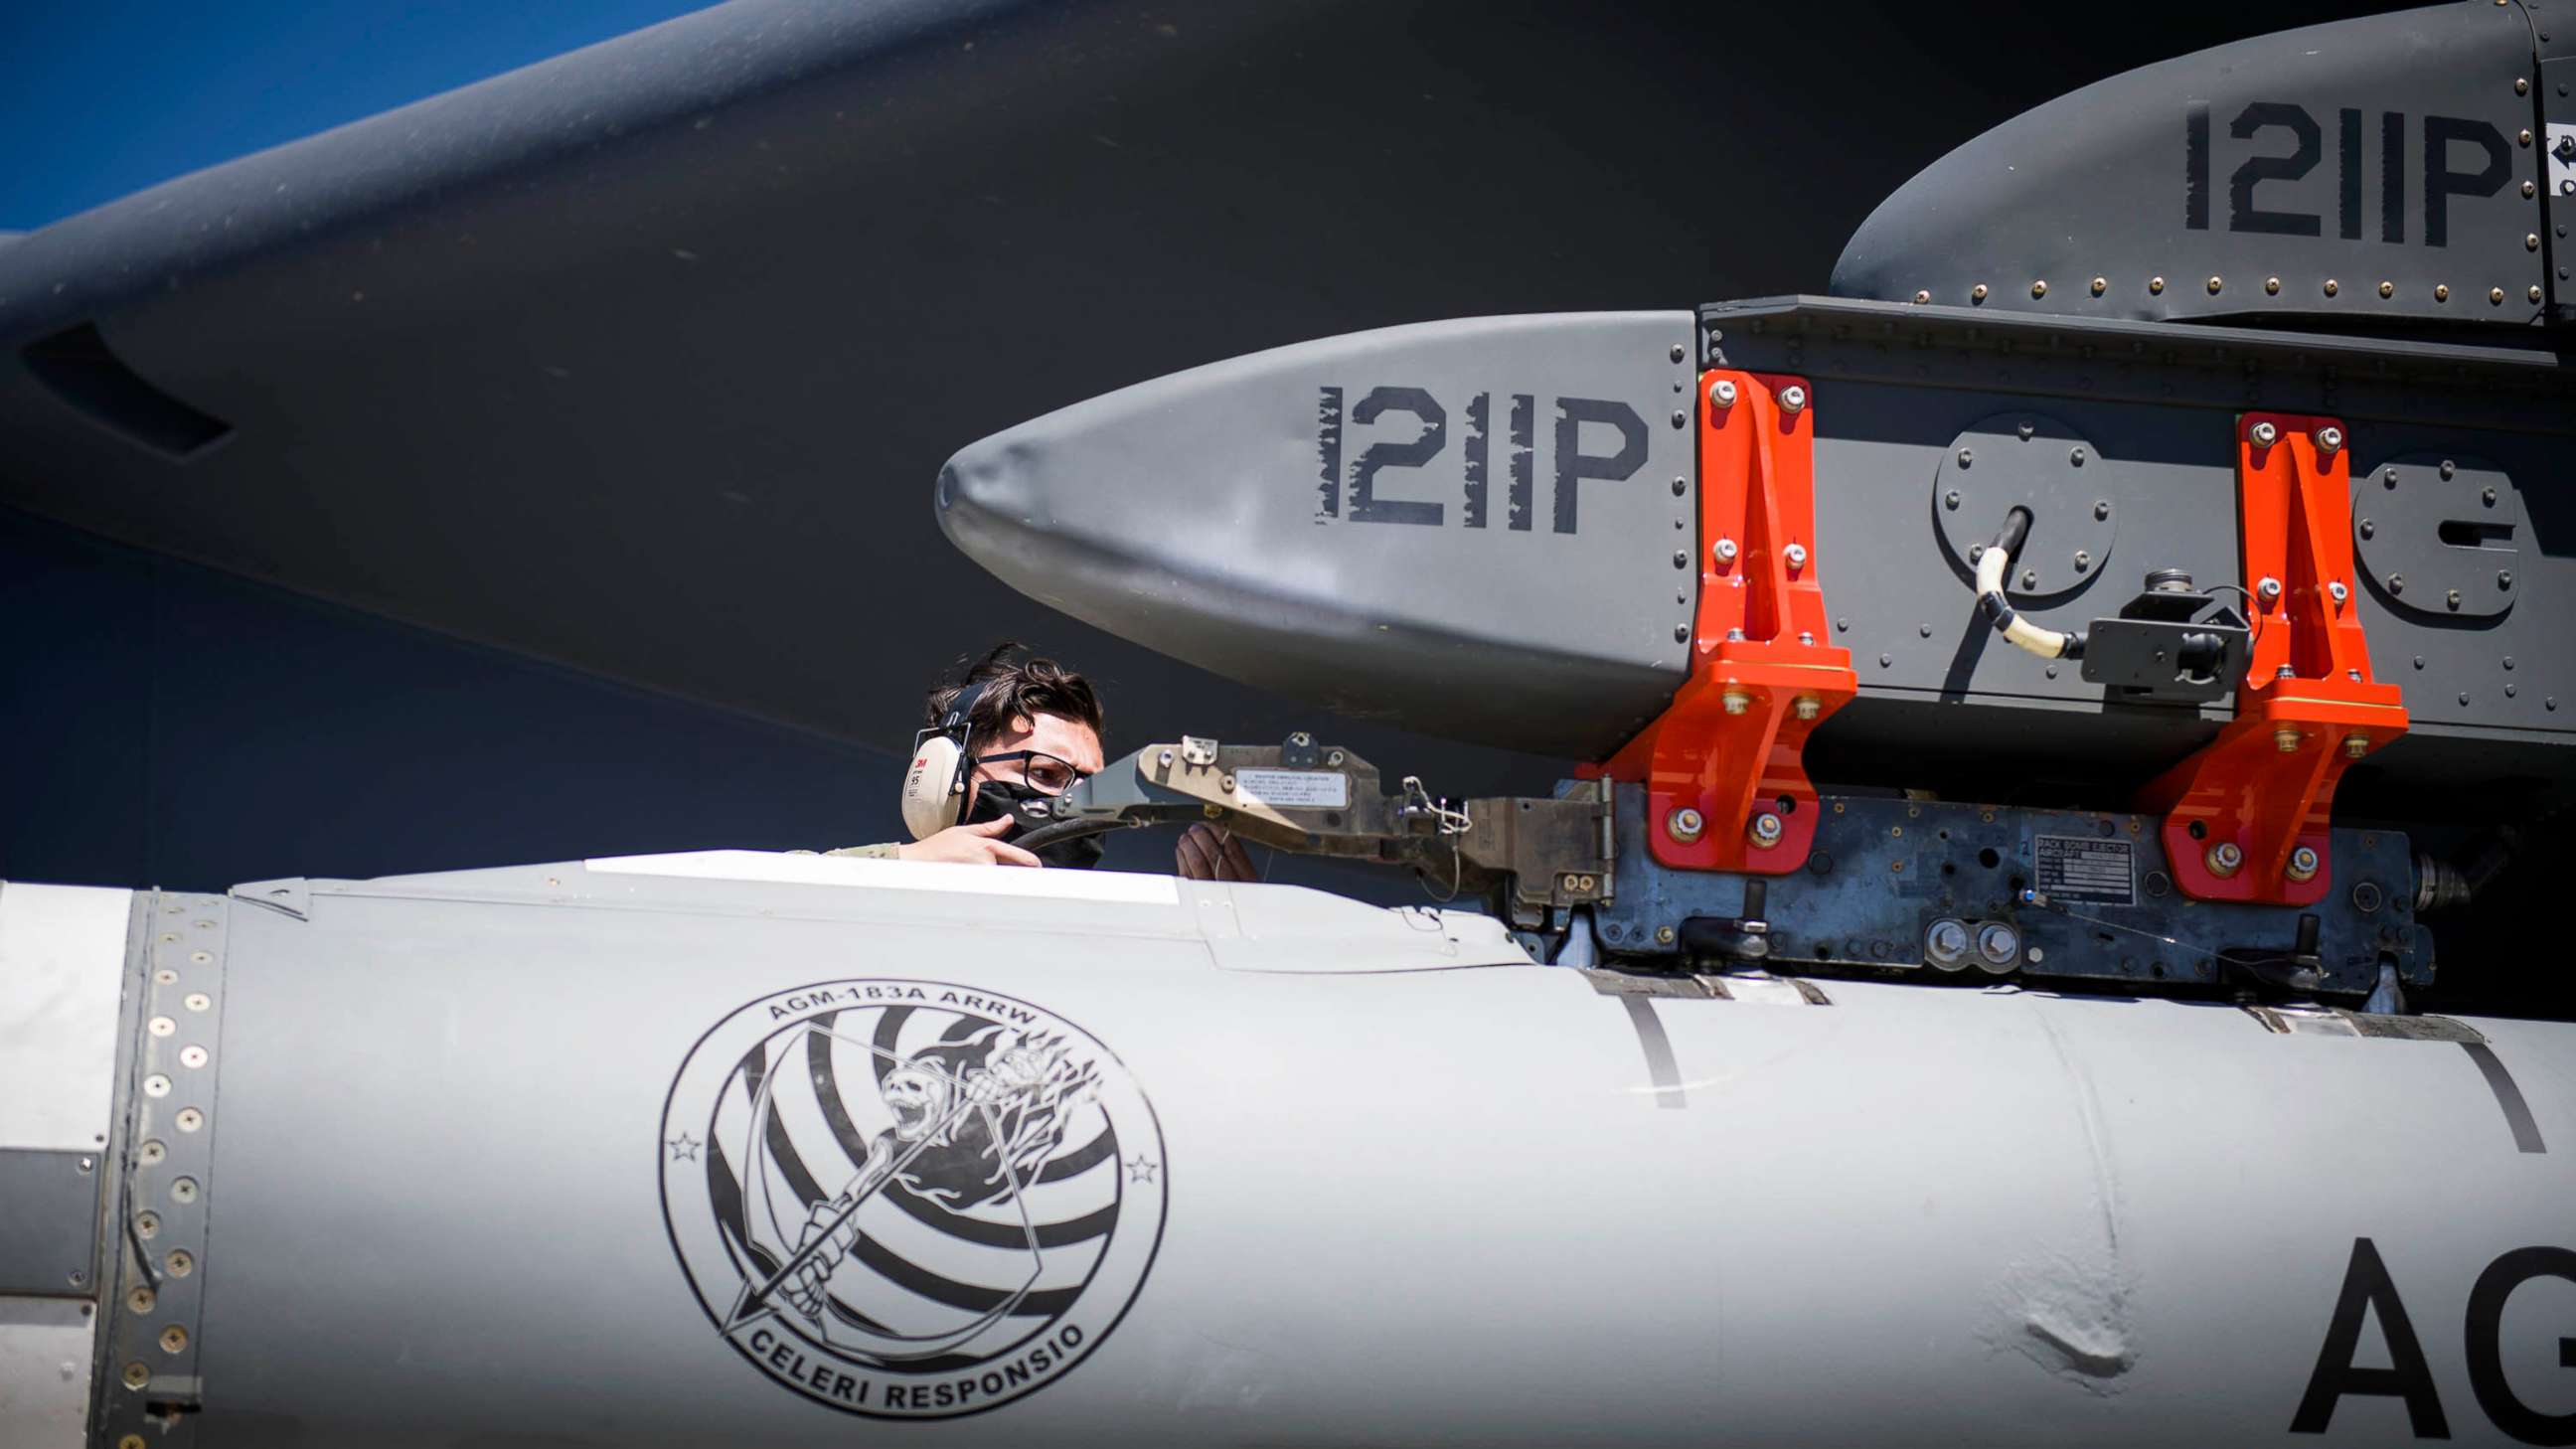 PHOTO: Staff Sgt. Jacob Puente, 912th Aircraft Maintenance Squadron, secures the AGM-183A Air-launched Rapid Response Weapon Instrumented Measurement Vehicle 2 as it is loaded under the wing of a B-52H Stratofortress, California, Aug. 6.